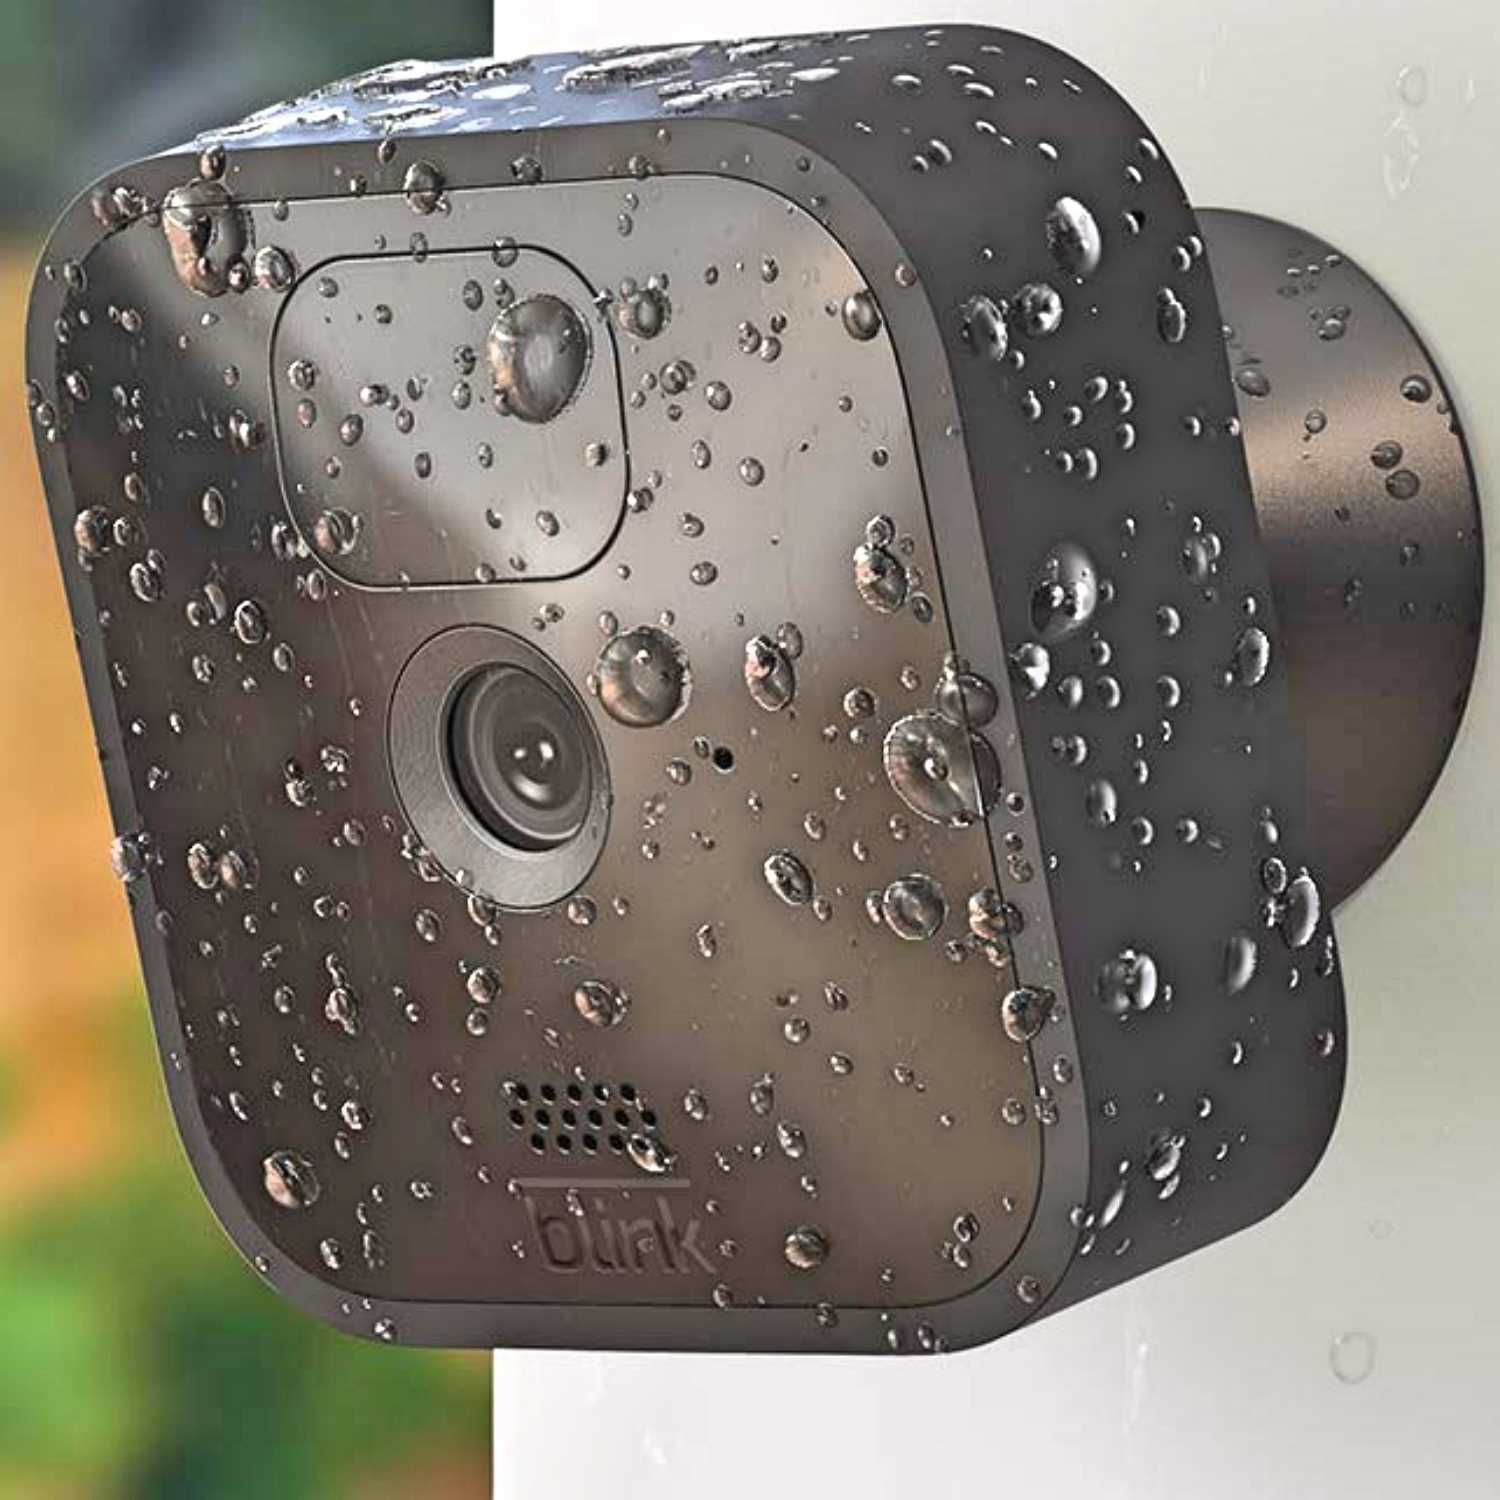 Outdoor Wireless HD Motion Detection Security Camera Rainy - Awesome Mens Christmas Gifts